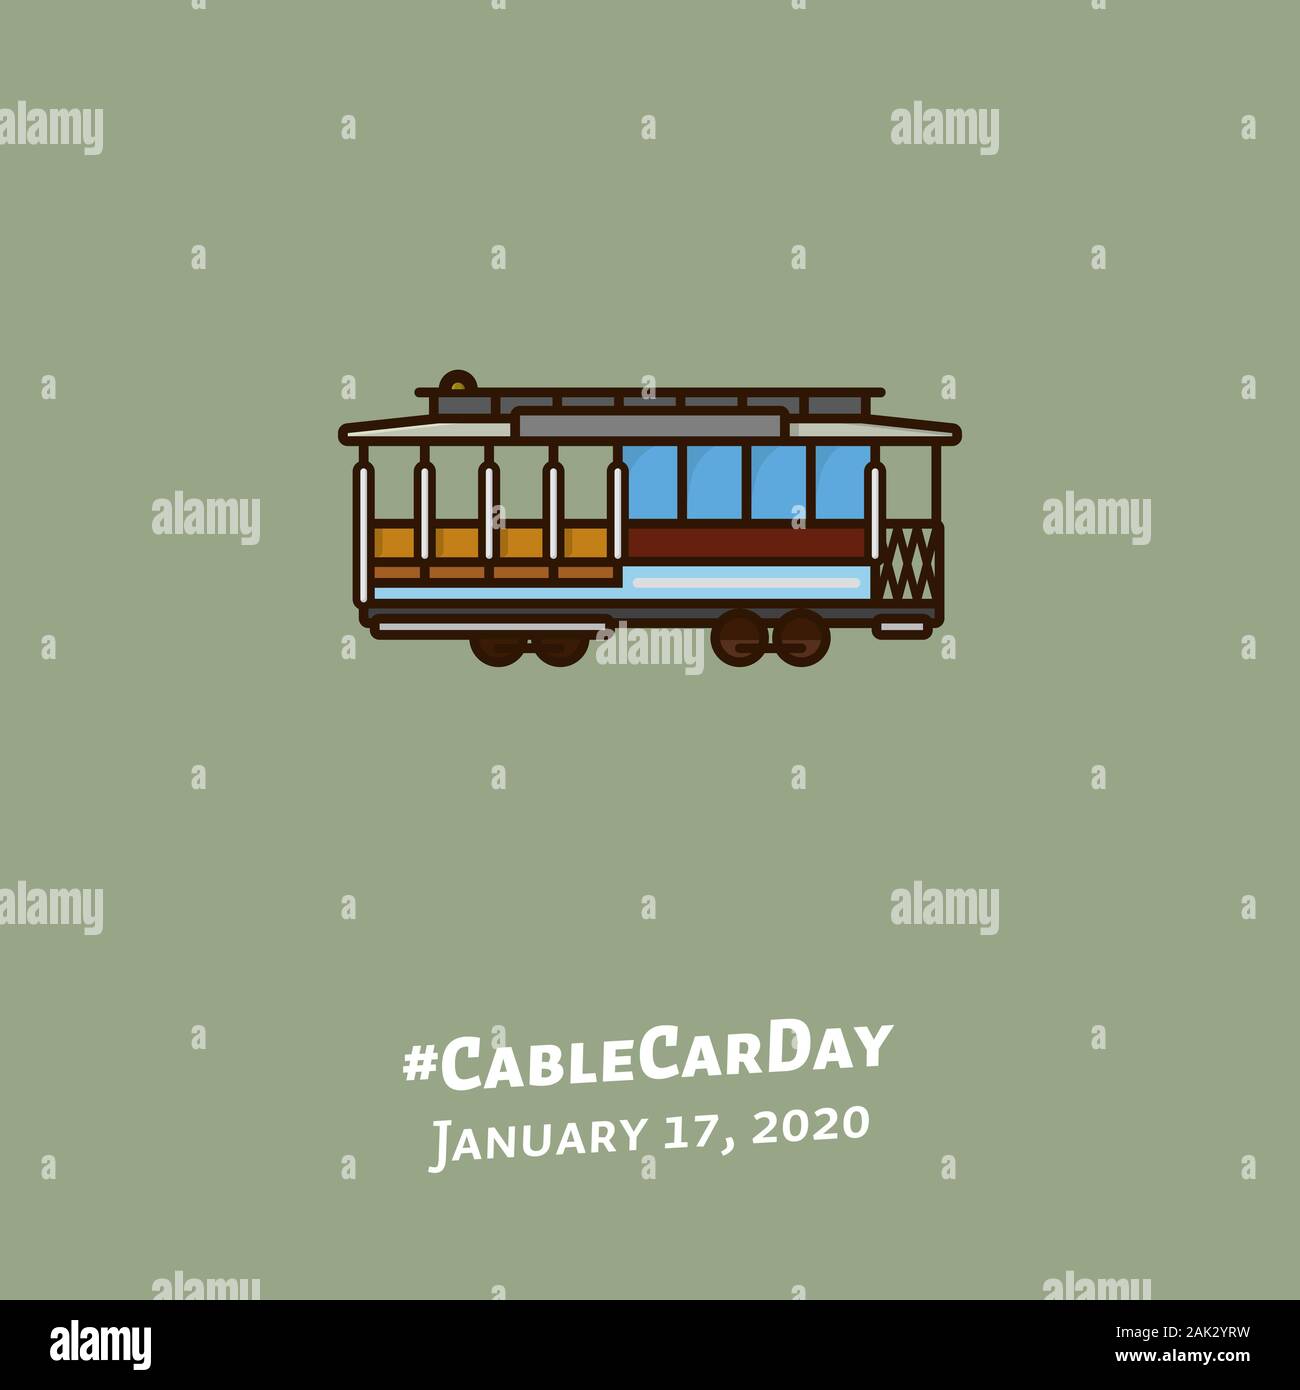 San Francisco cable car illustration for #CableCarDay on January 17. San Francisco public transport color vector symbol. Stock Vector